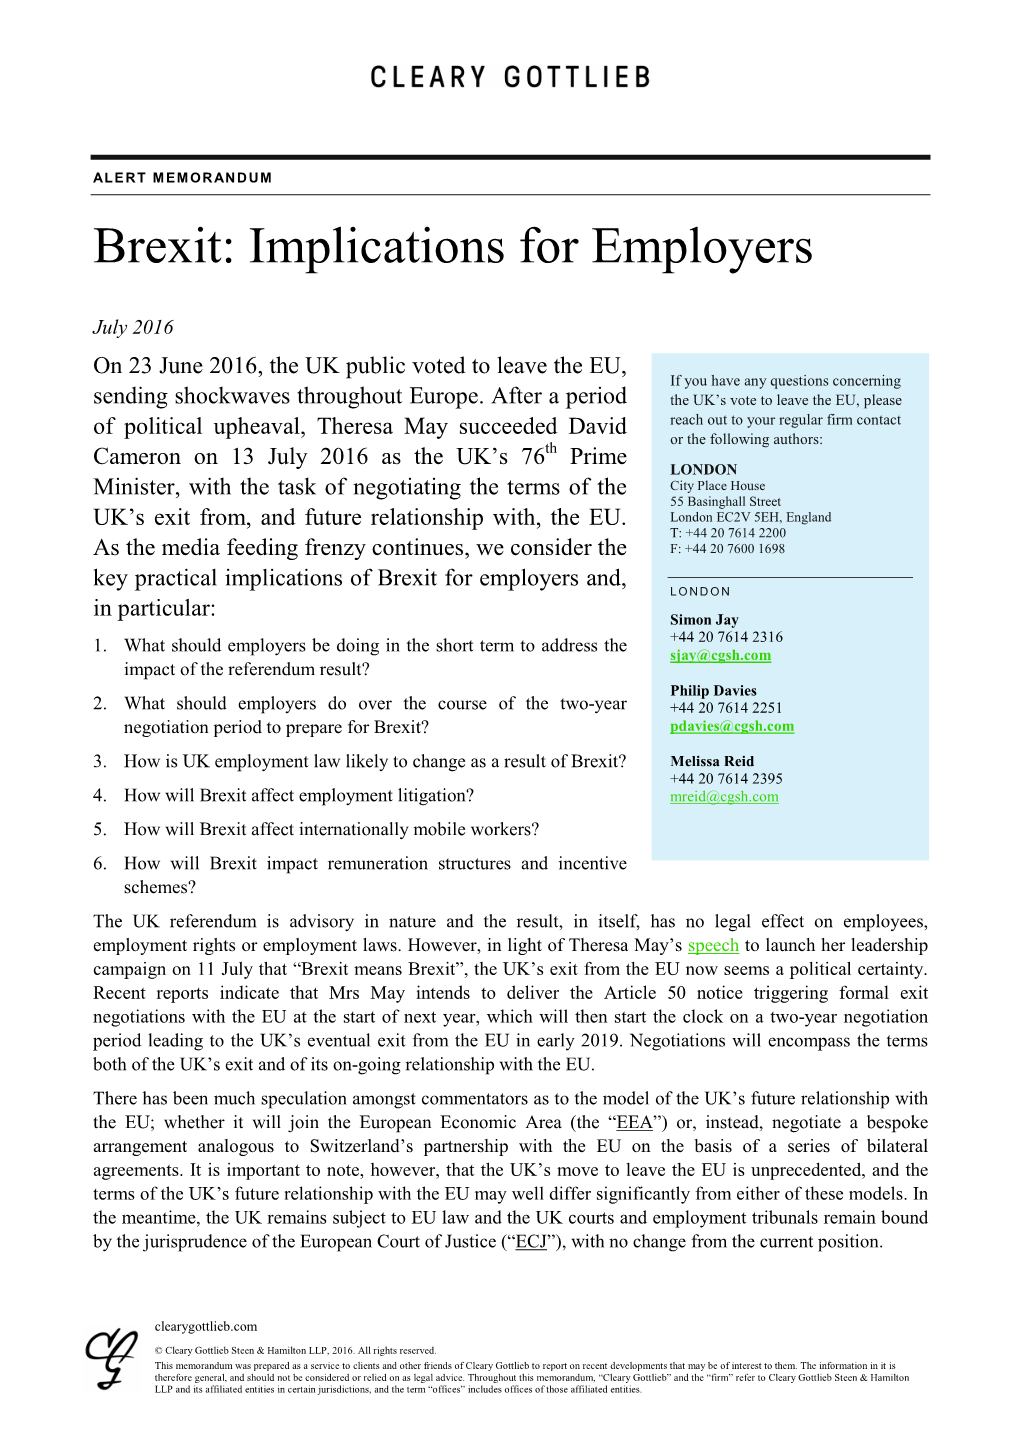 Brexit: Implications for Employers